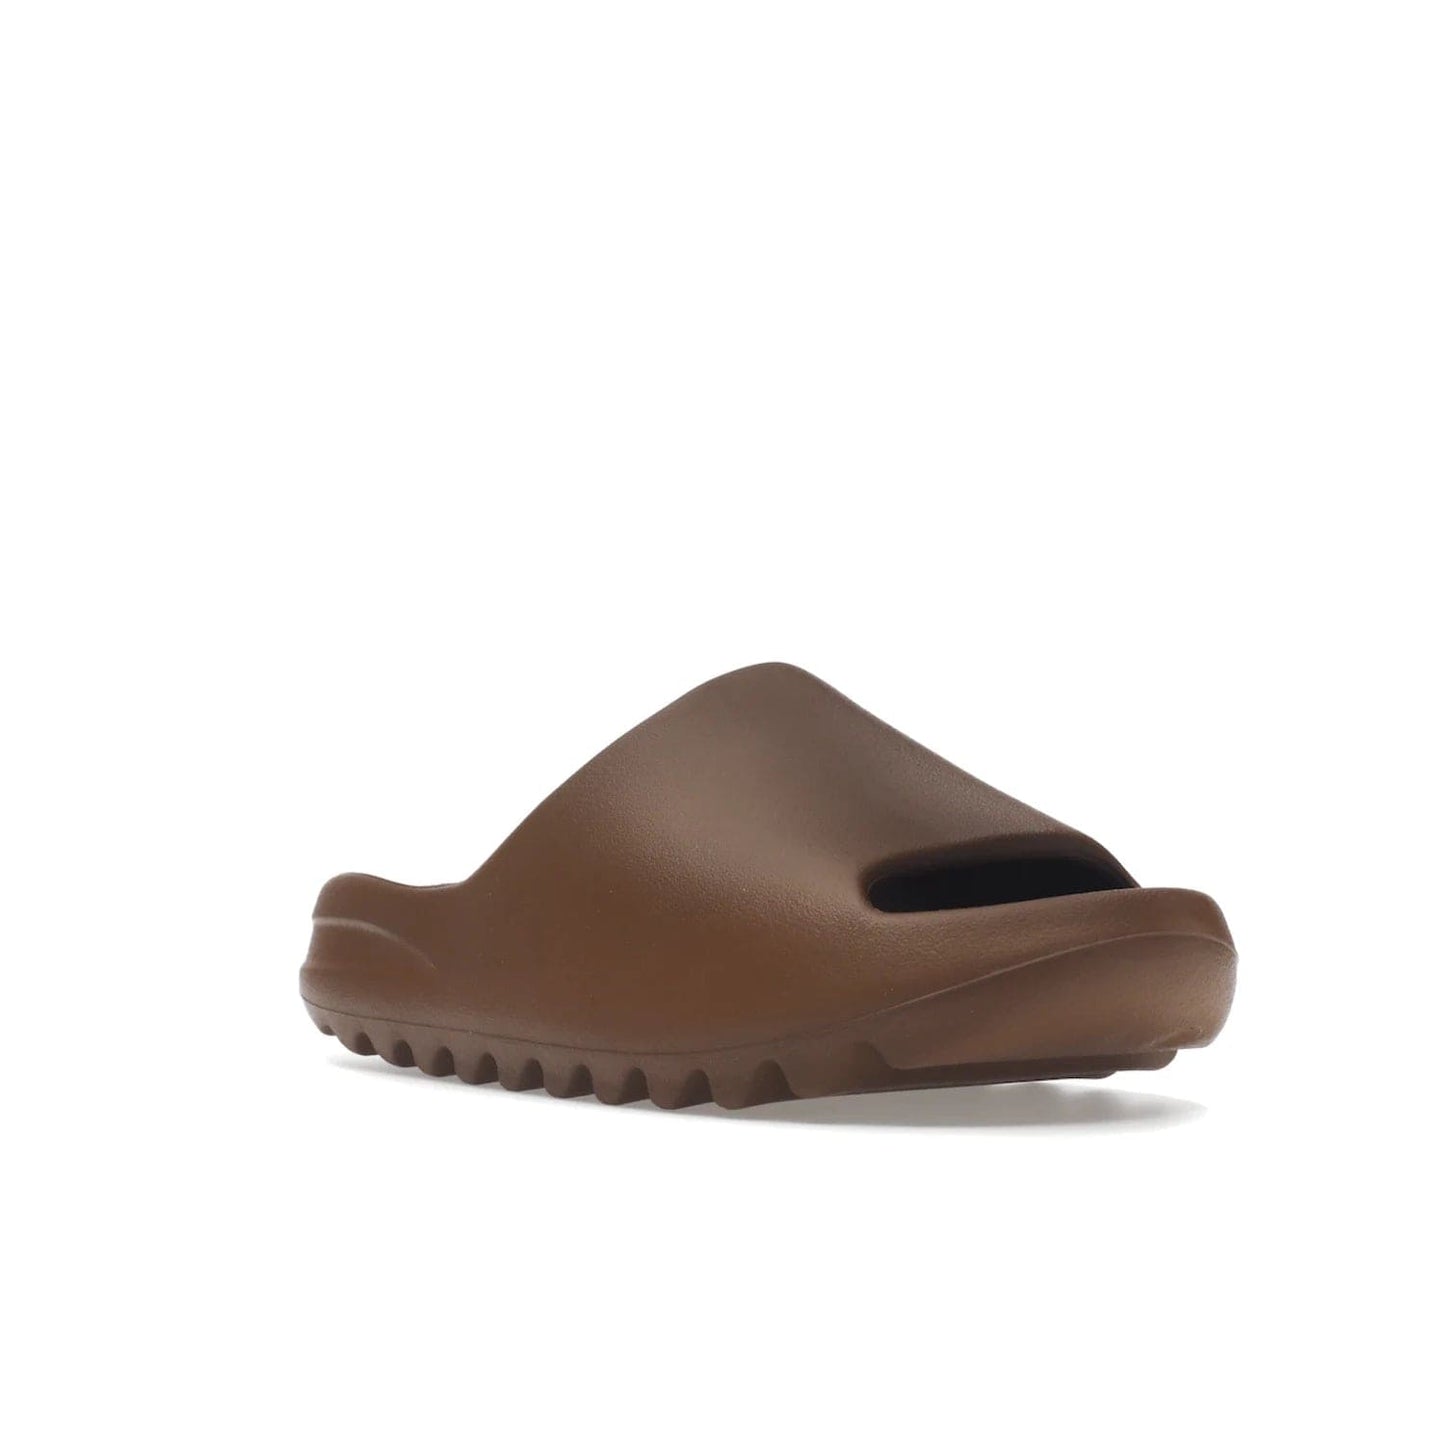 adidas Yeezy Slide Flax - Image 6 - Only at www.BallersClubKickz.com - Score the perfect casual look with the adidas Yeezy Slide Flax. Made with lightweight injected EVA plus horizontal grooves underfoot for traction. Release on August 22, 2022. $70.